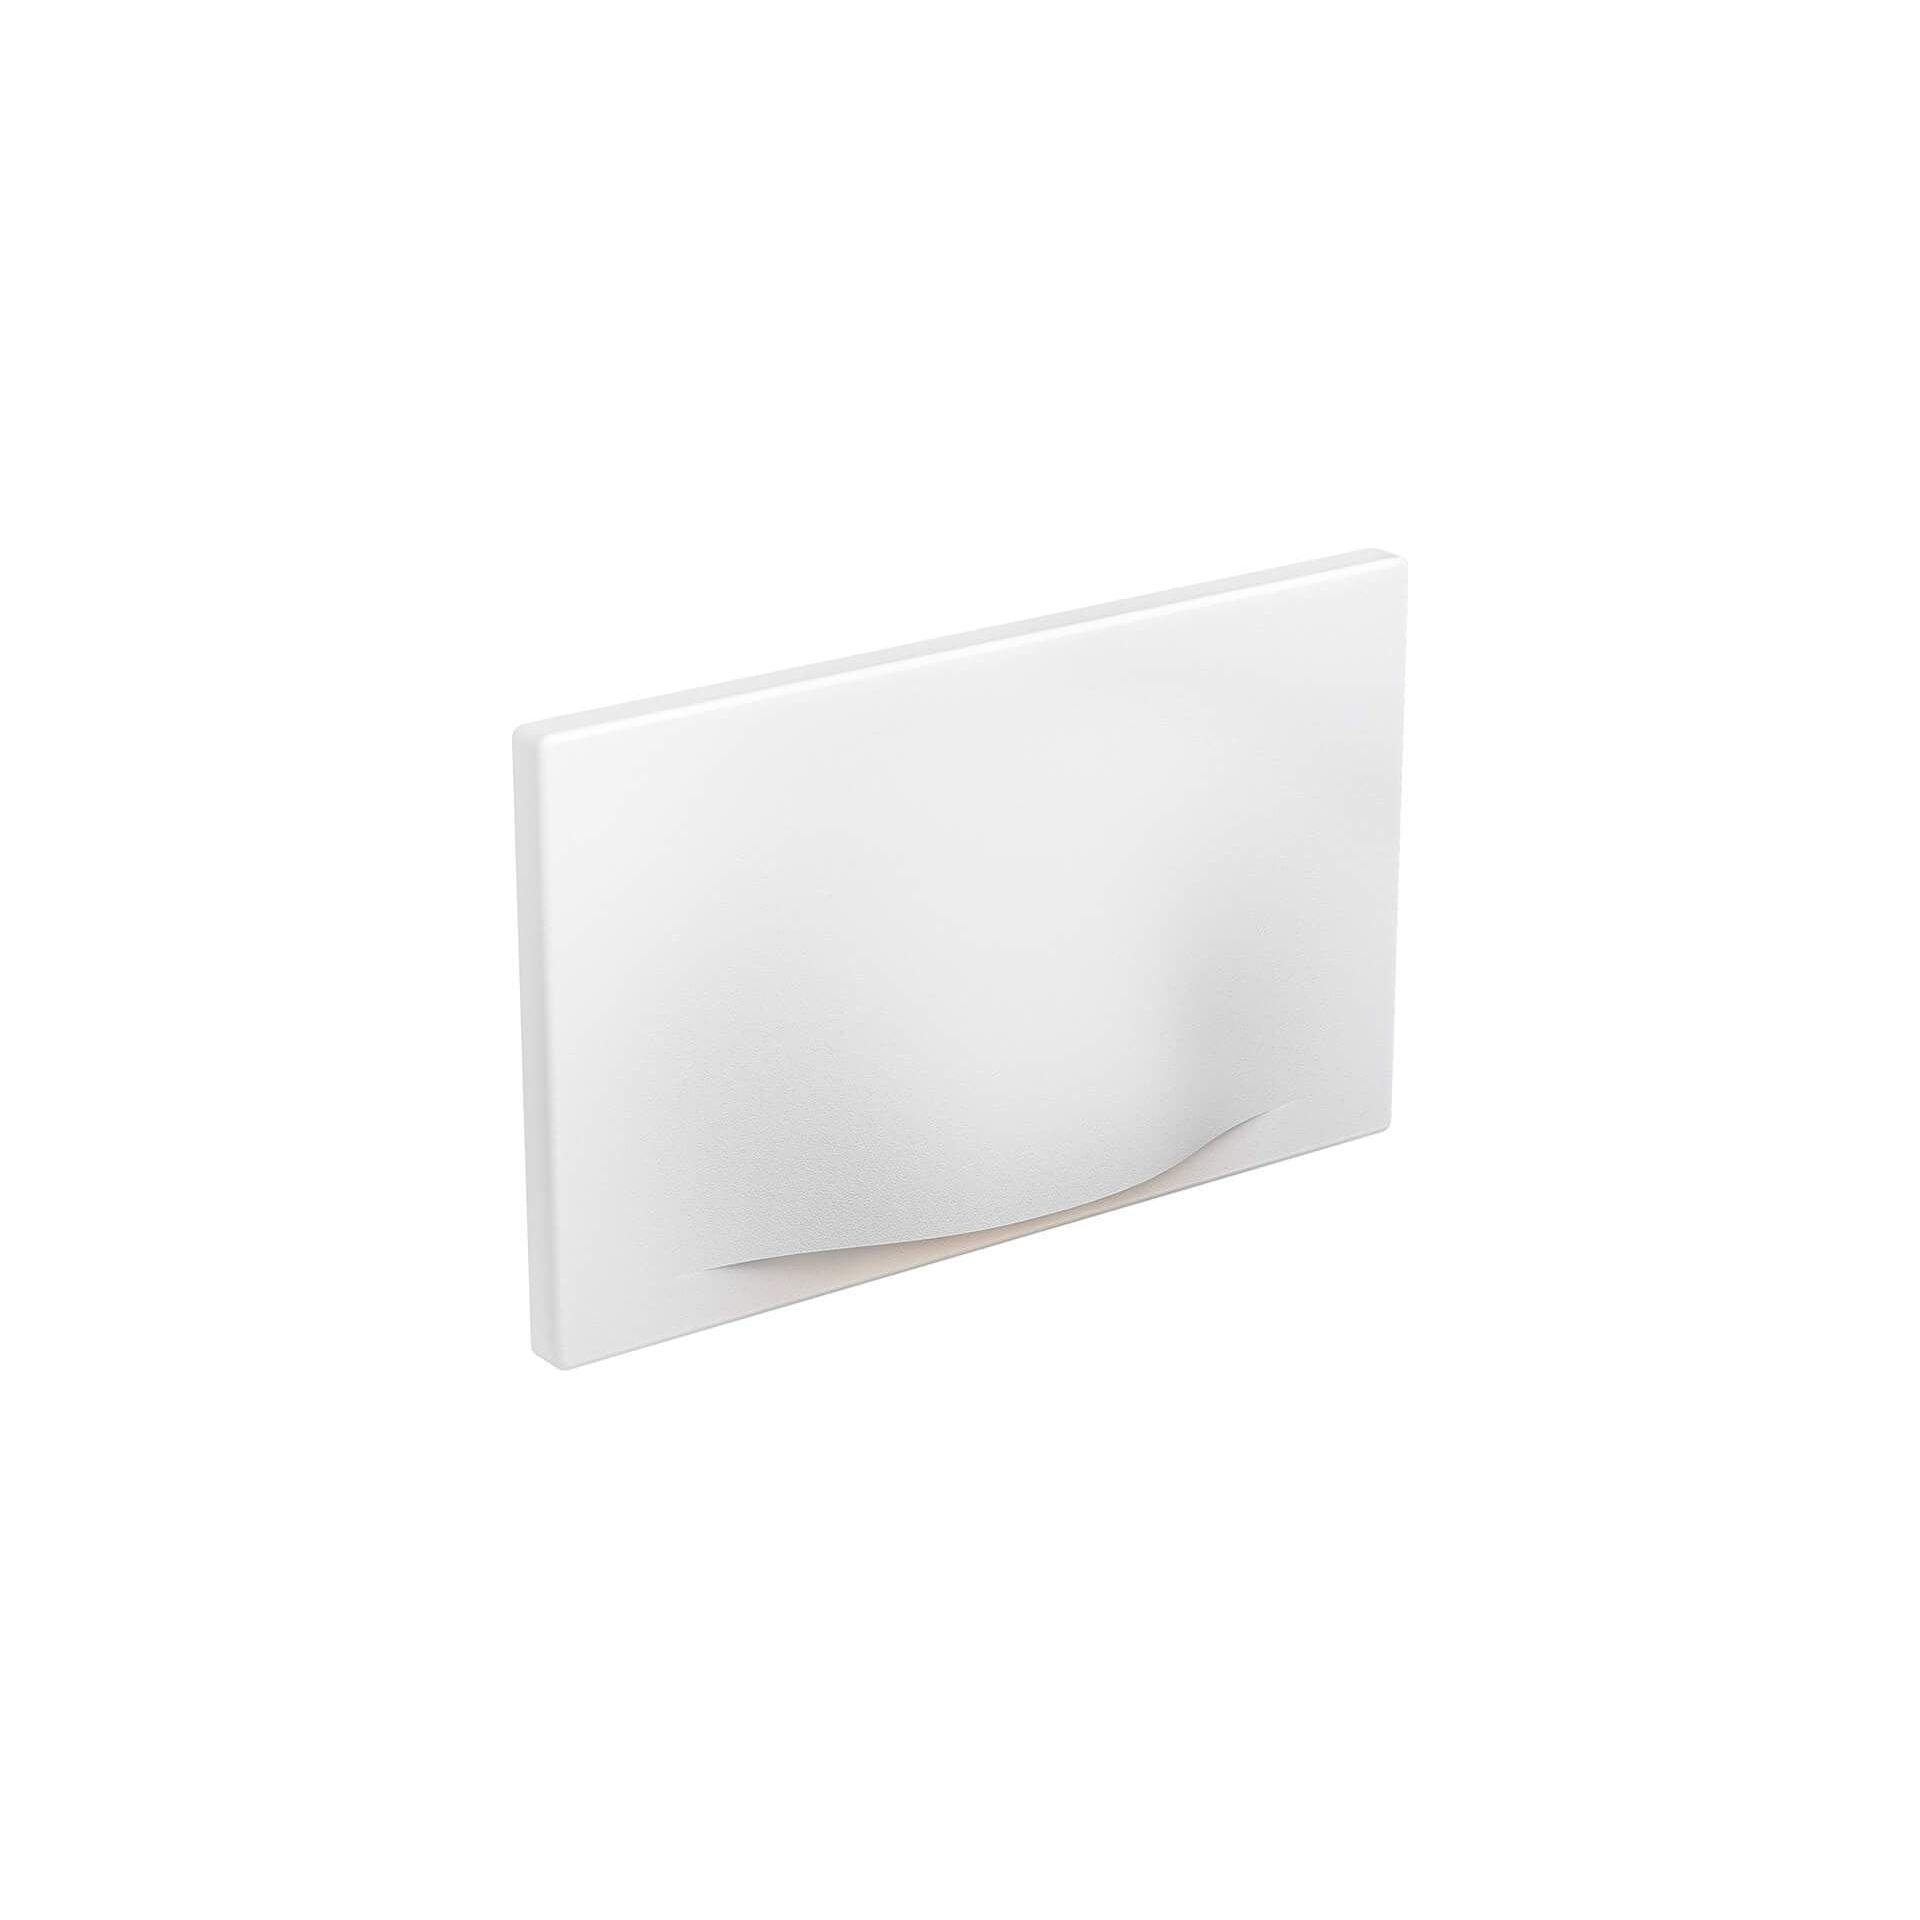 DALS - Recessed Horizontal Led Step Light - Lights Canada